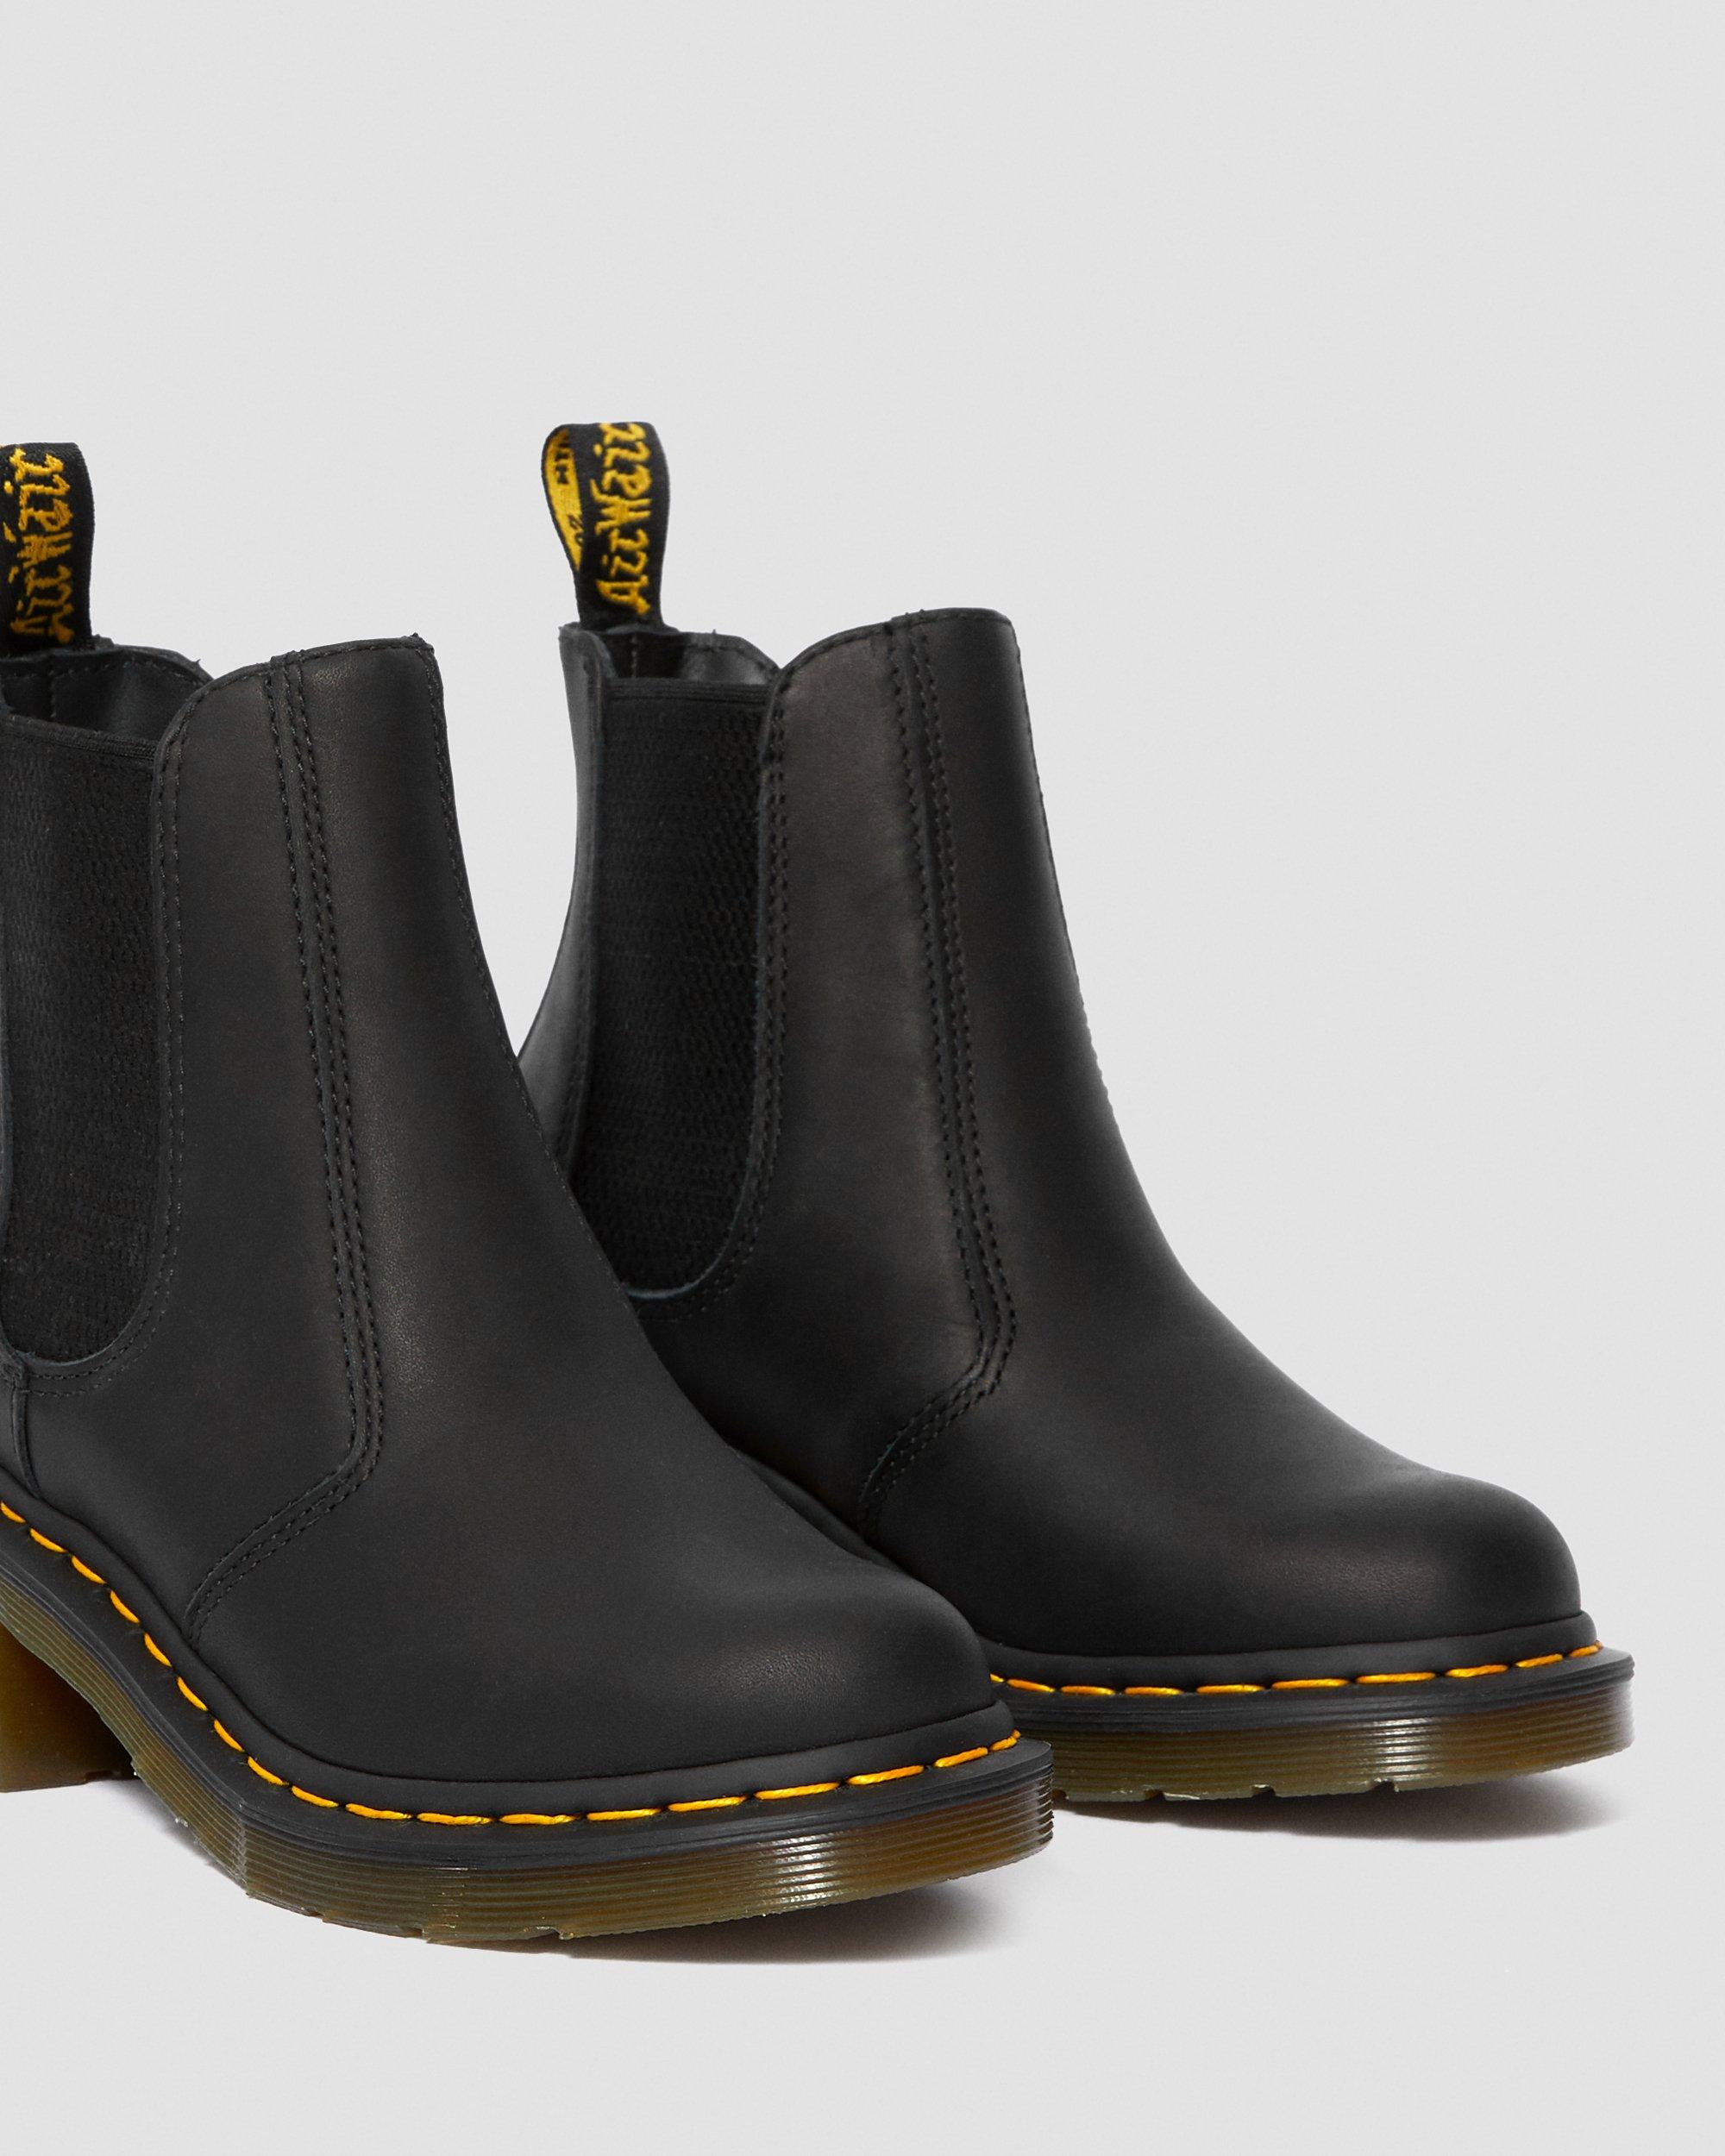 Cadence Greasy Heeled Chelsea Boots in Black